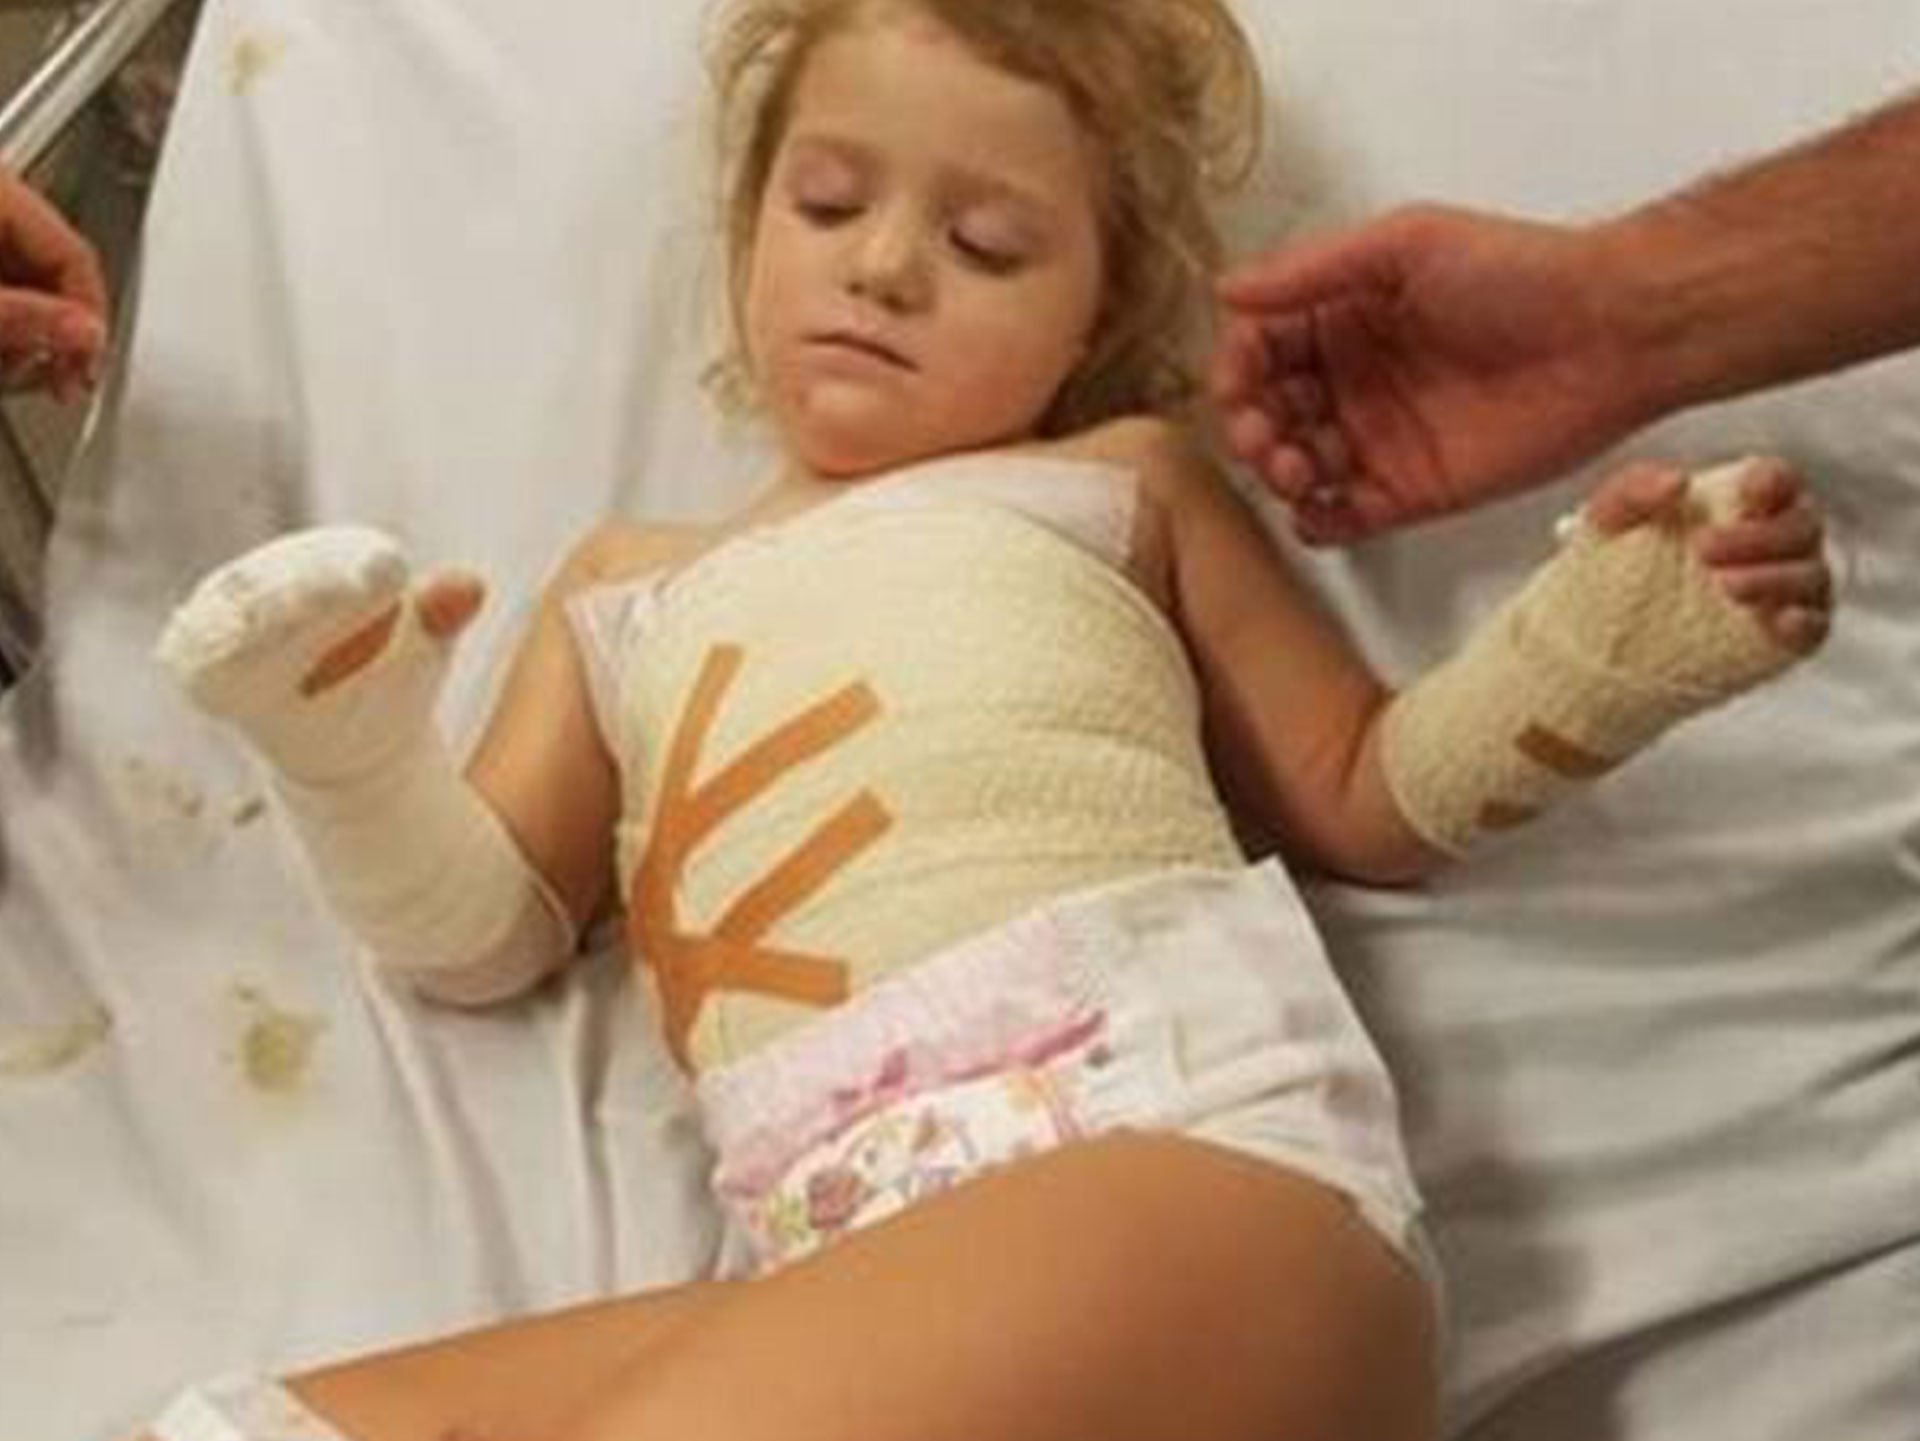 A three-year-old has been forced to get skin grafts after horrific treadmill accident